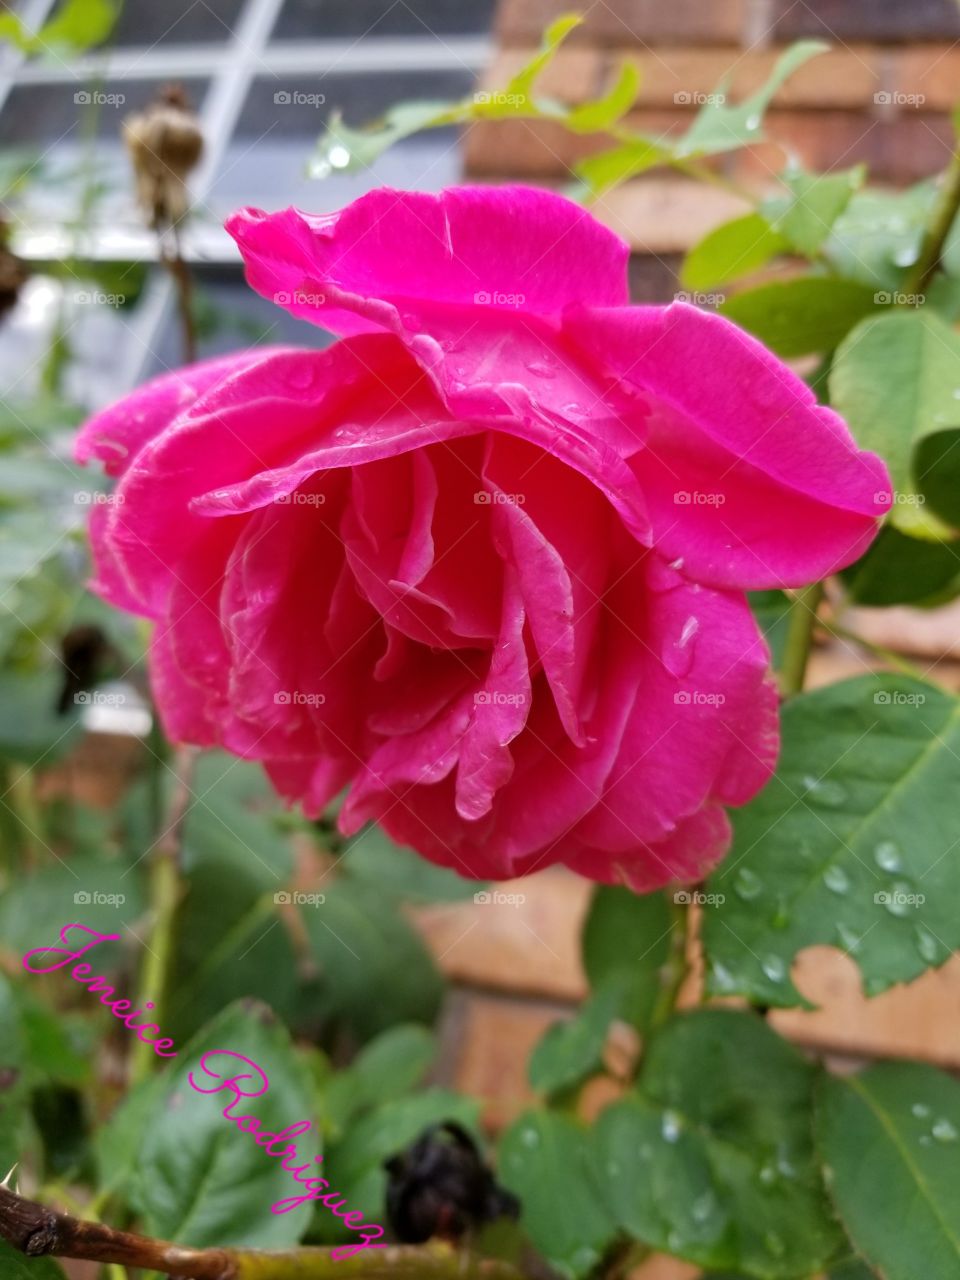 perfect little rose